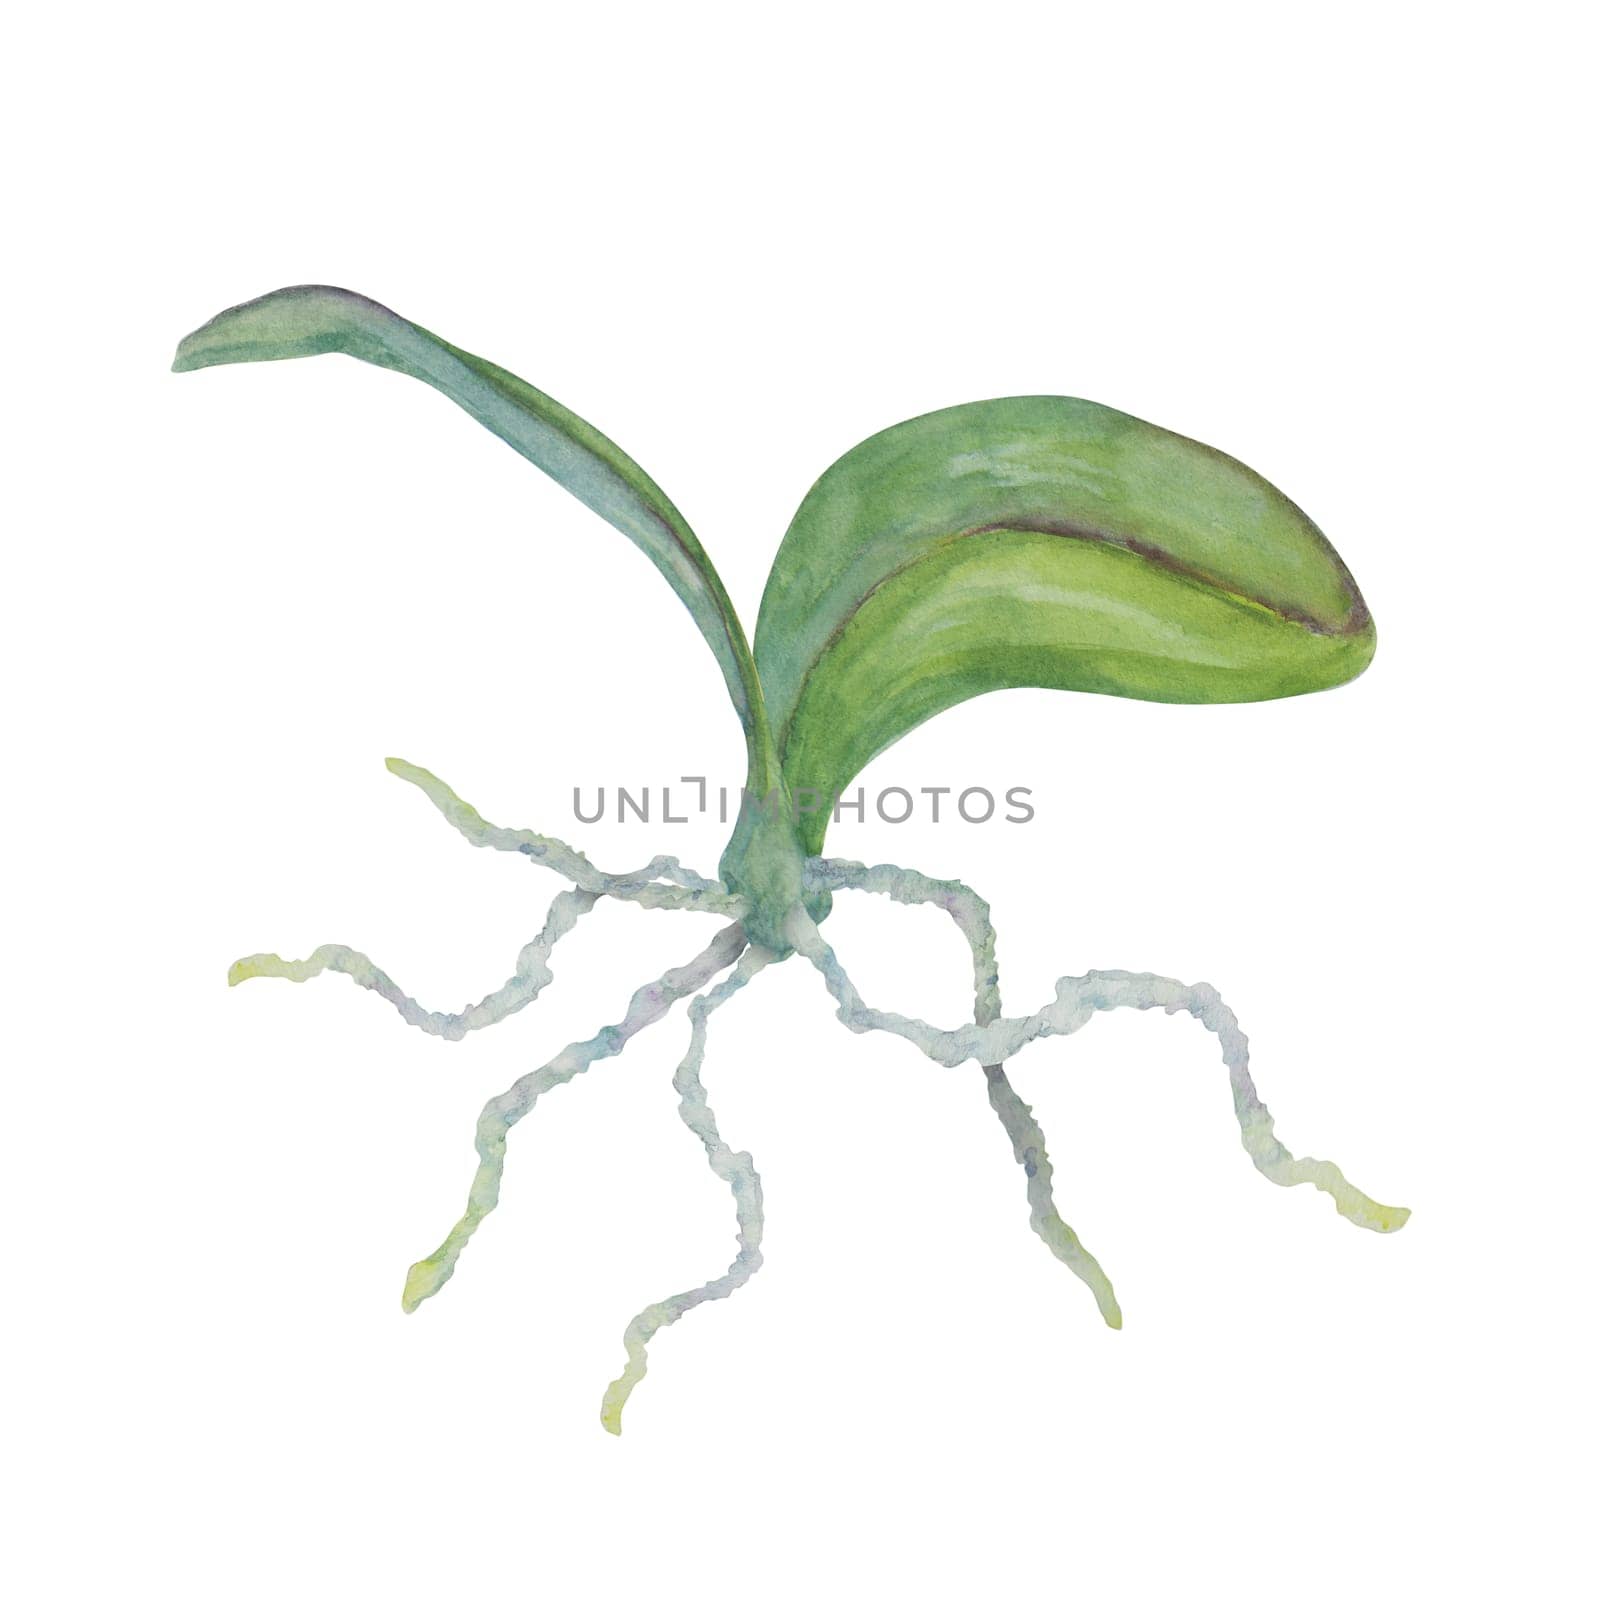 Green orchid leaves and roots. Delicate realistic botanical watercolor hand drawn illustration. Clip art for wedding invitations, decor, textiles, gifts, packaging, floristry, flower farming, shops by florainlove_art